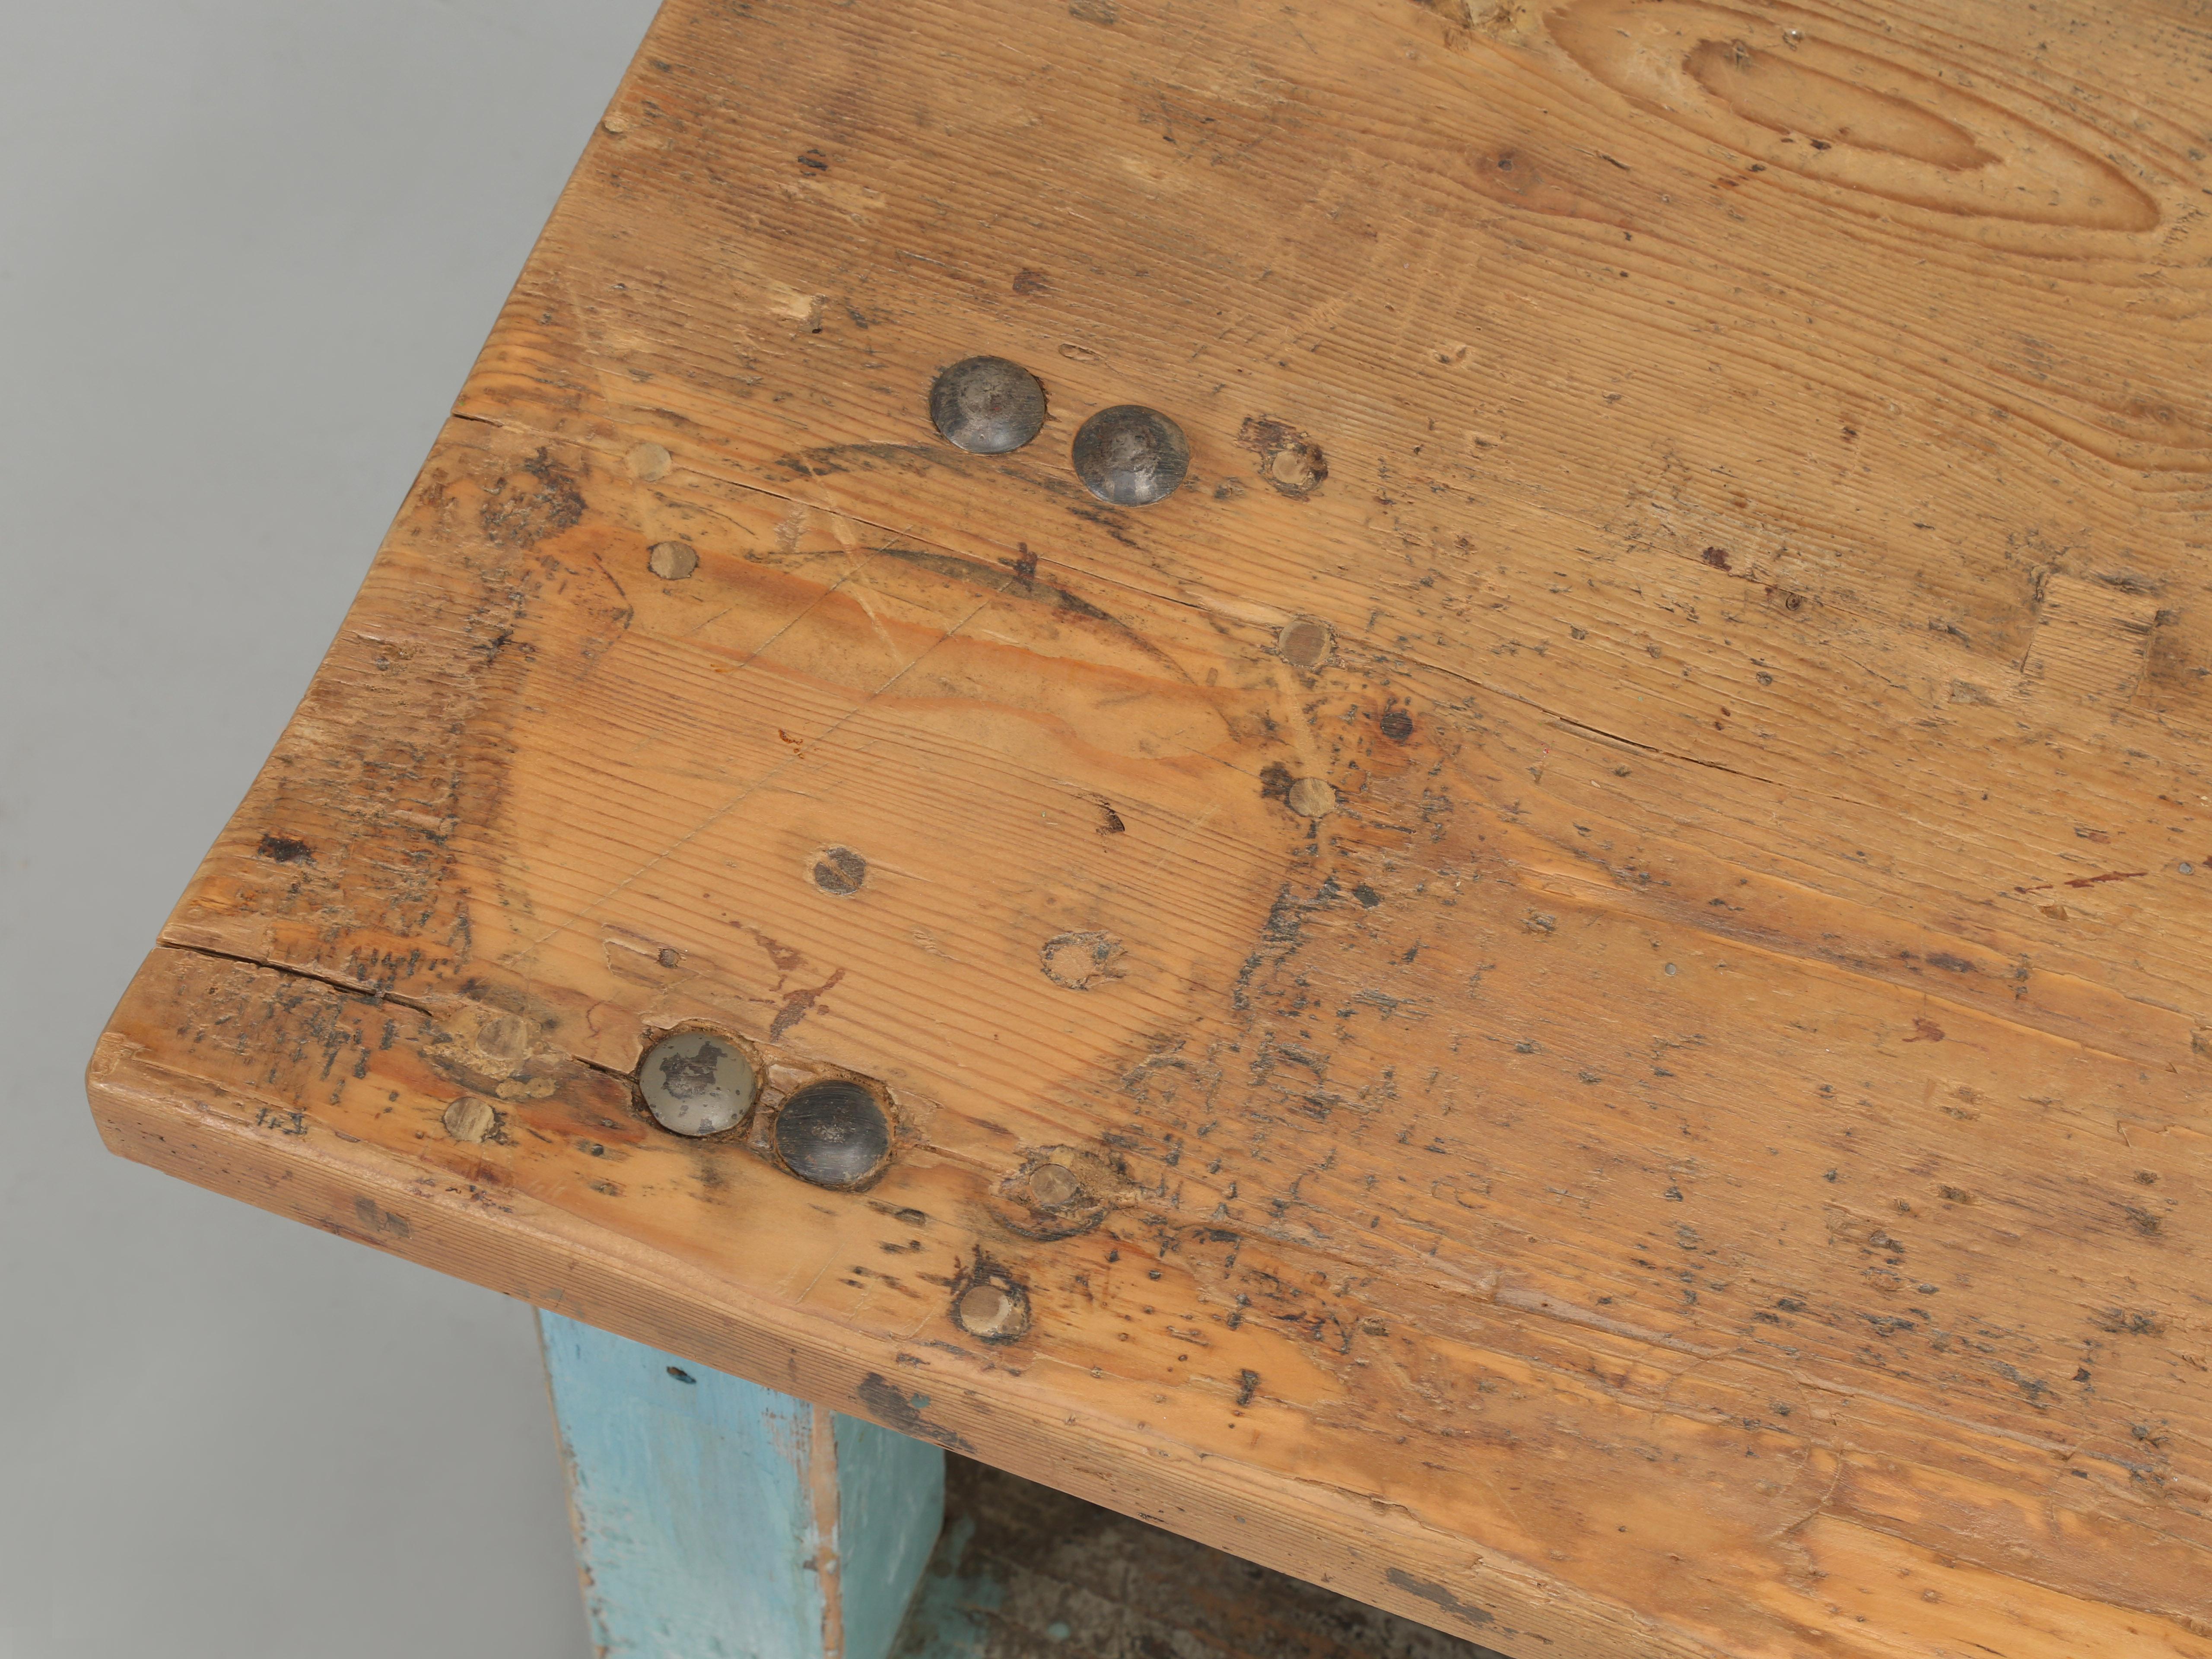 Early 20th Century American Industrial Work Table, Kitchen Island or Craft Table Original Paint